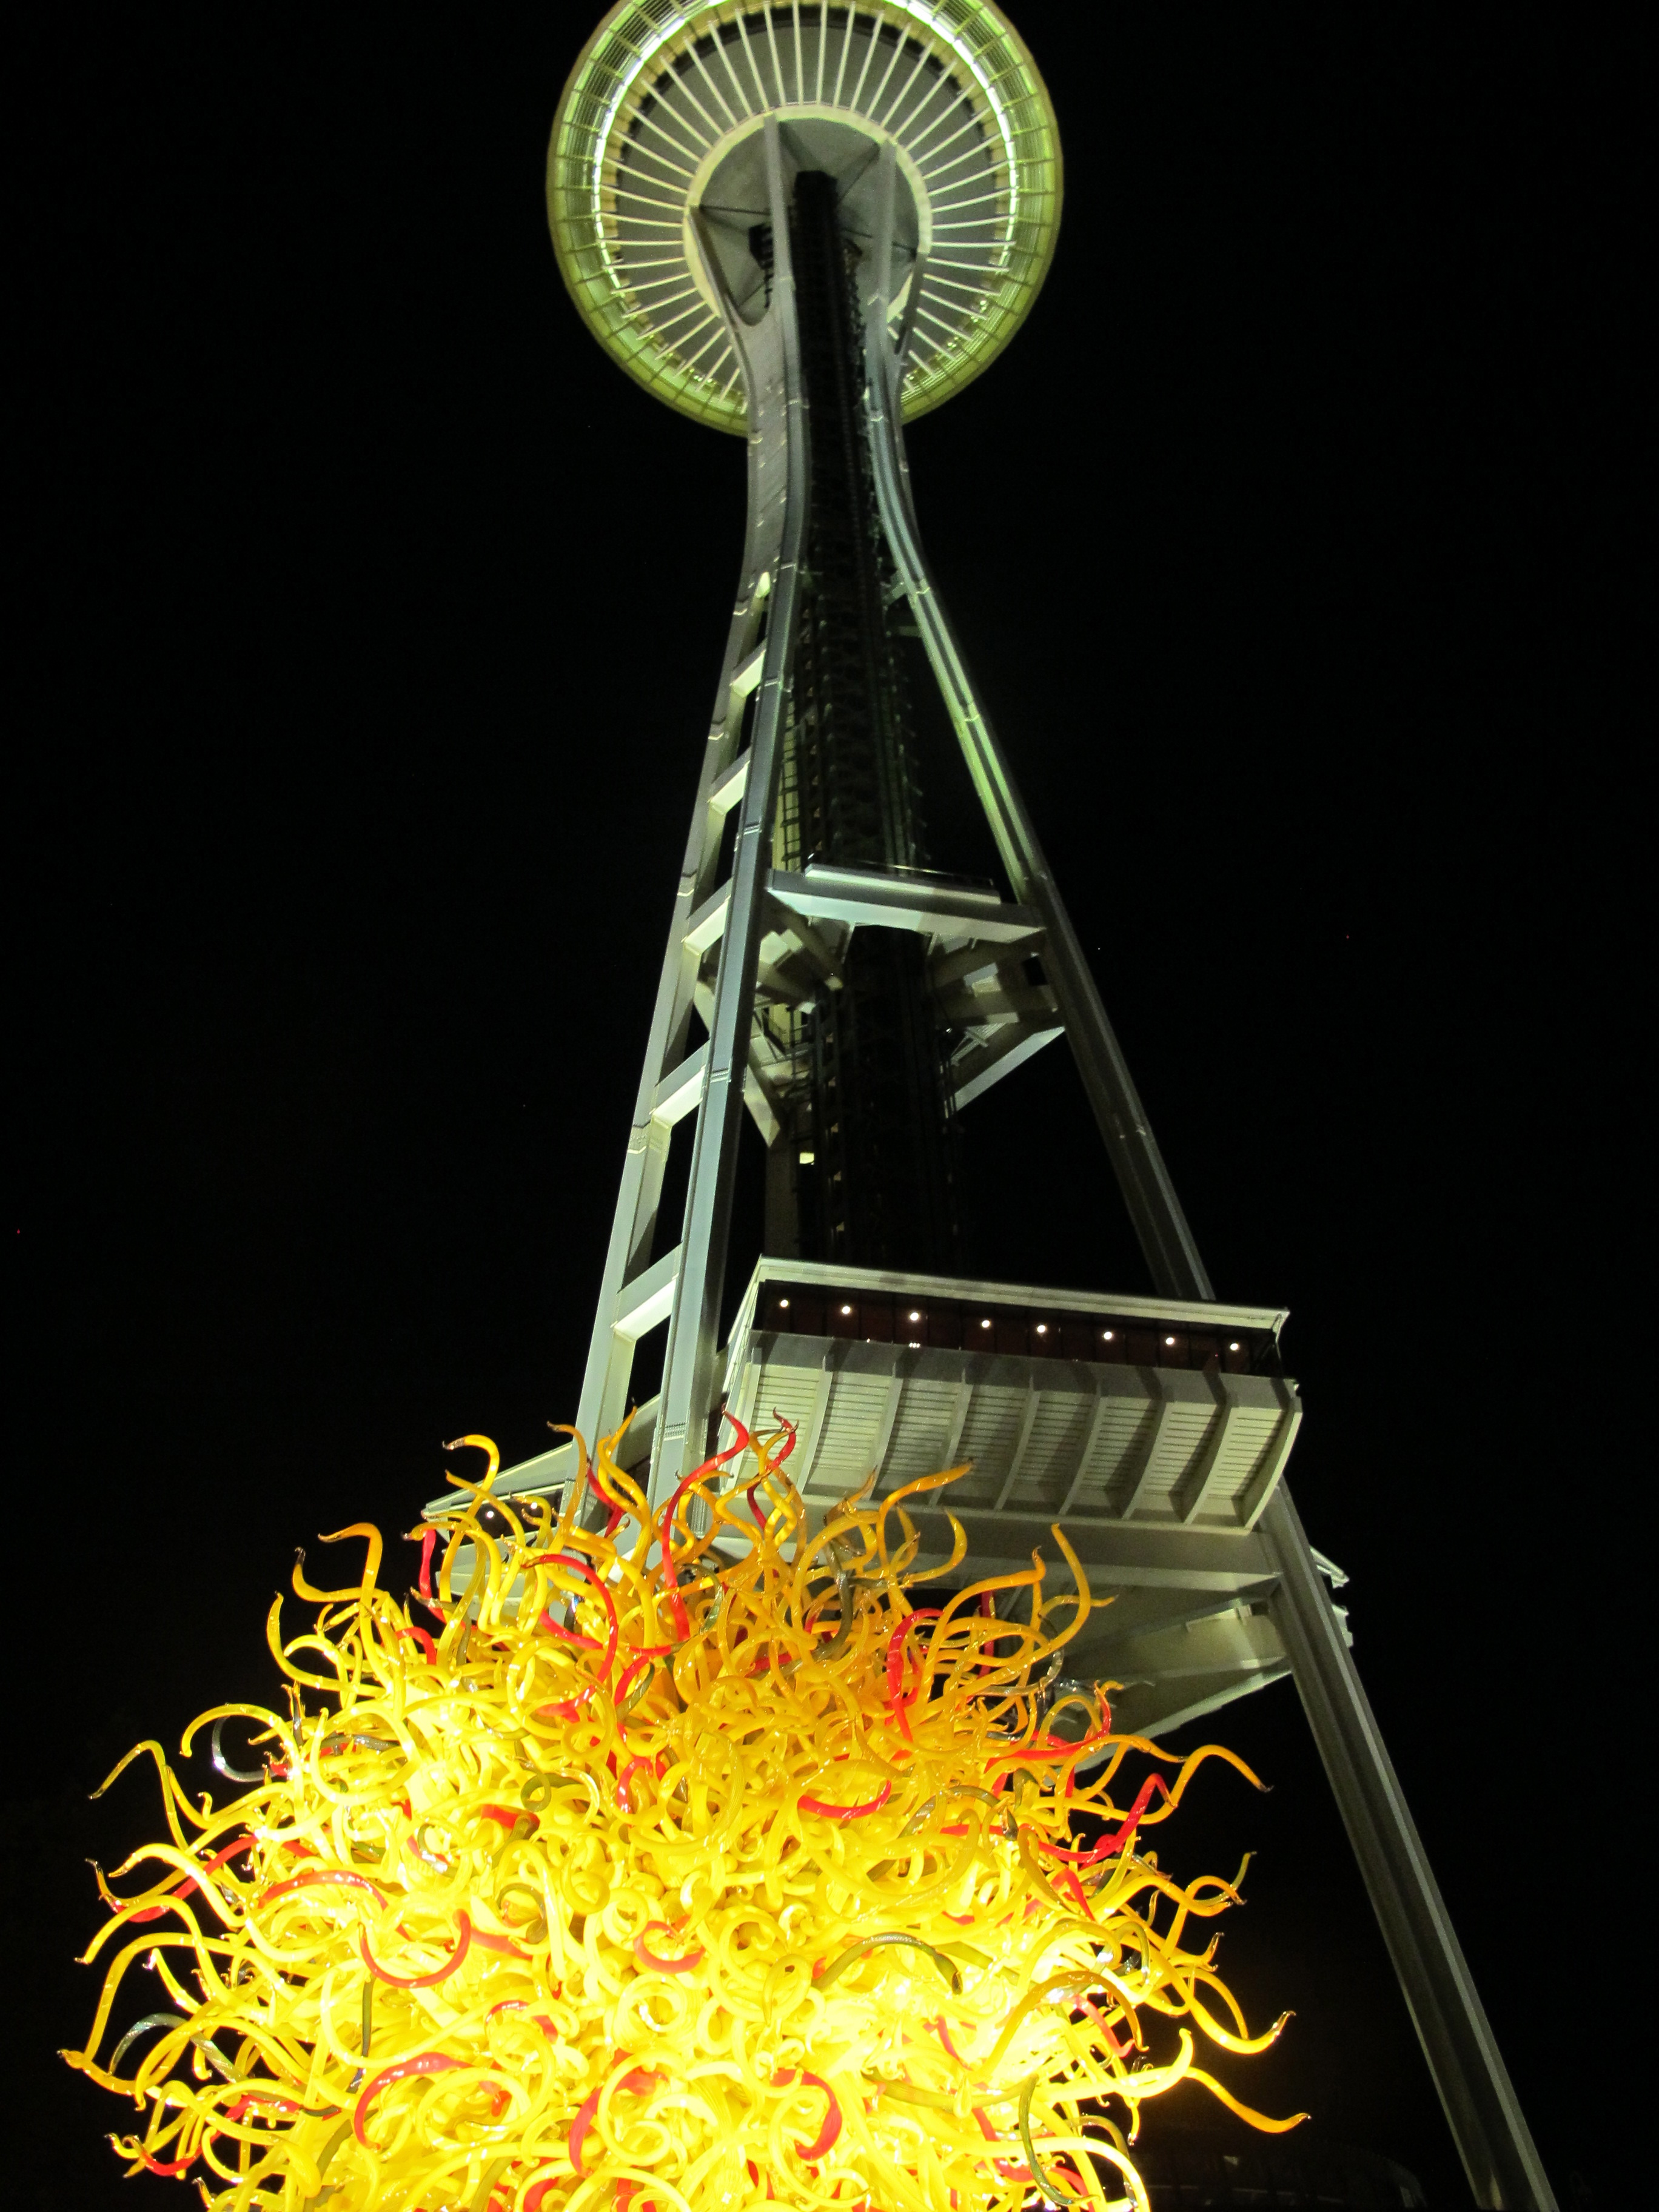 View from the base of the Space Needle from the Chihuly Garden. Photo by Marla Norman.